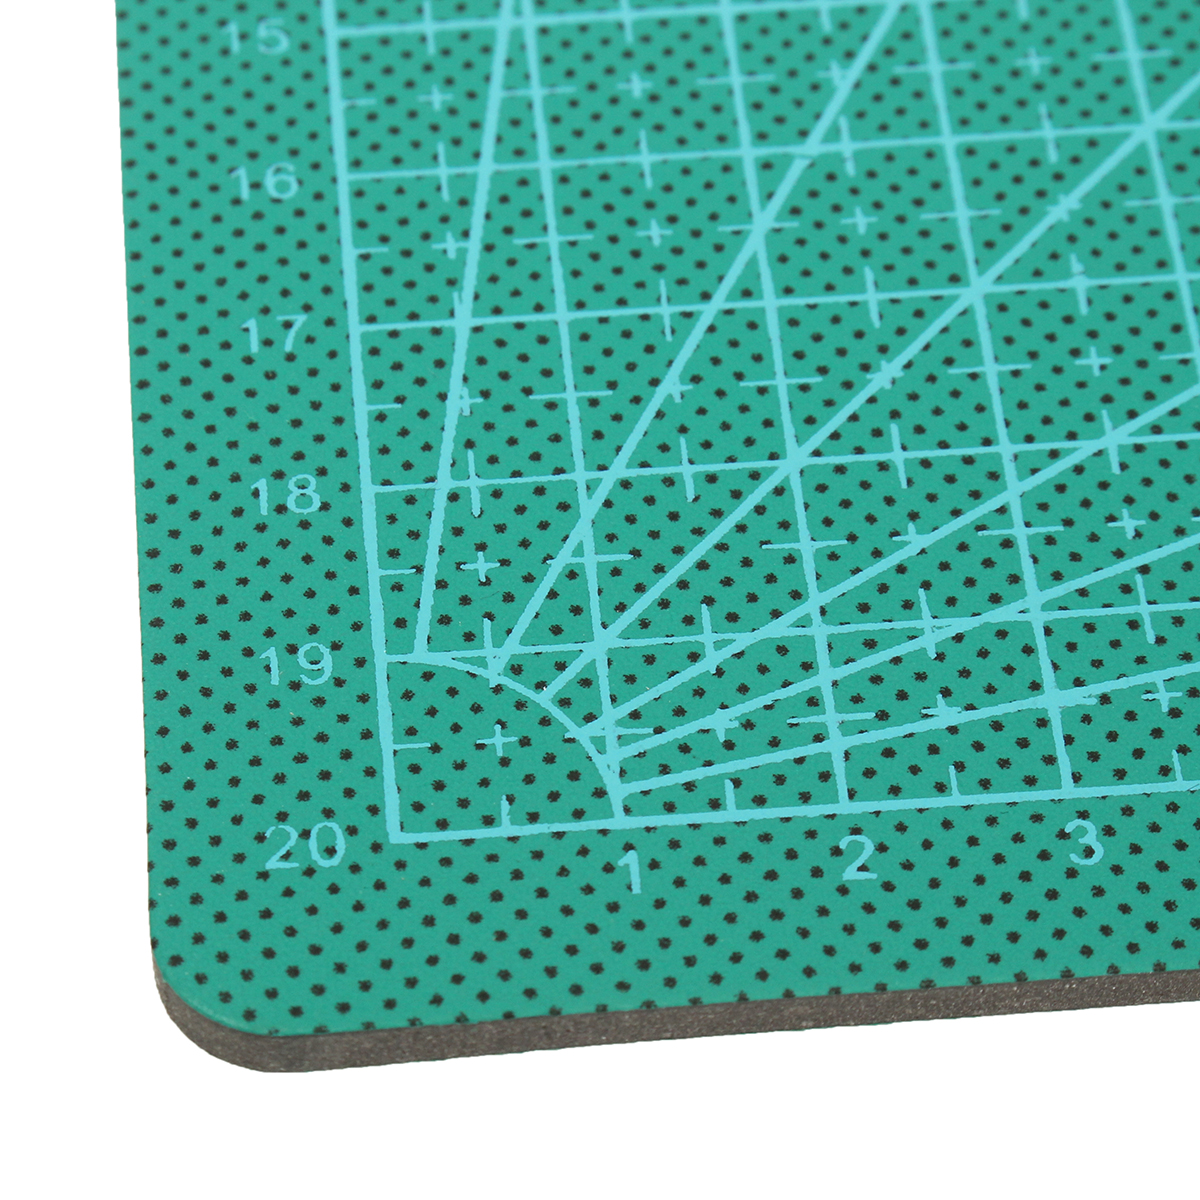 Double-Sided-Green-Cutting-Mat-Board-A4-Size-Pad-Model-Healing-Design-Craft-Tool-1202777-6